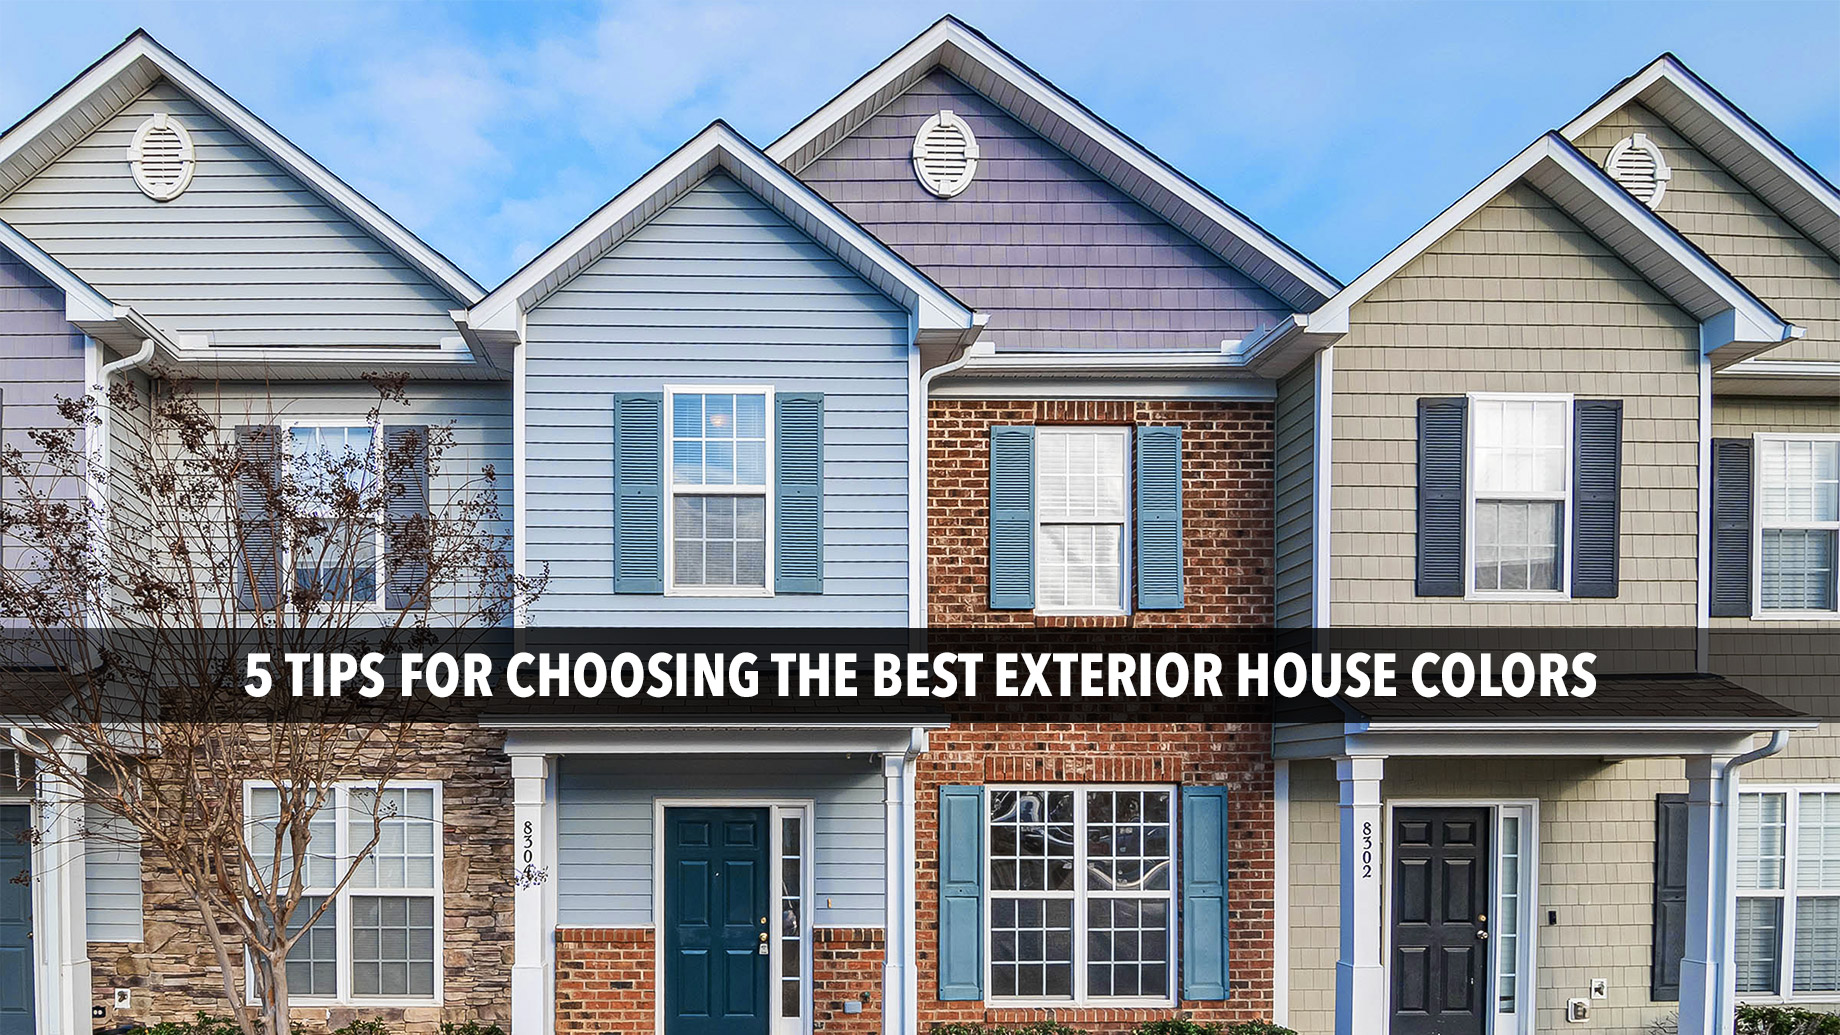 5 Tips for Choosing the Best Exterior House Colors